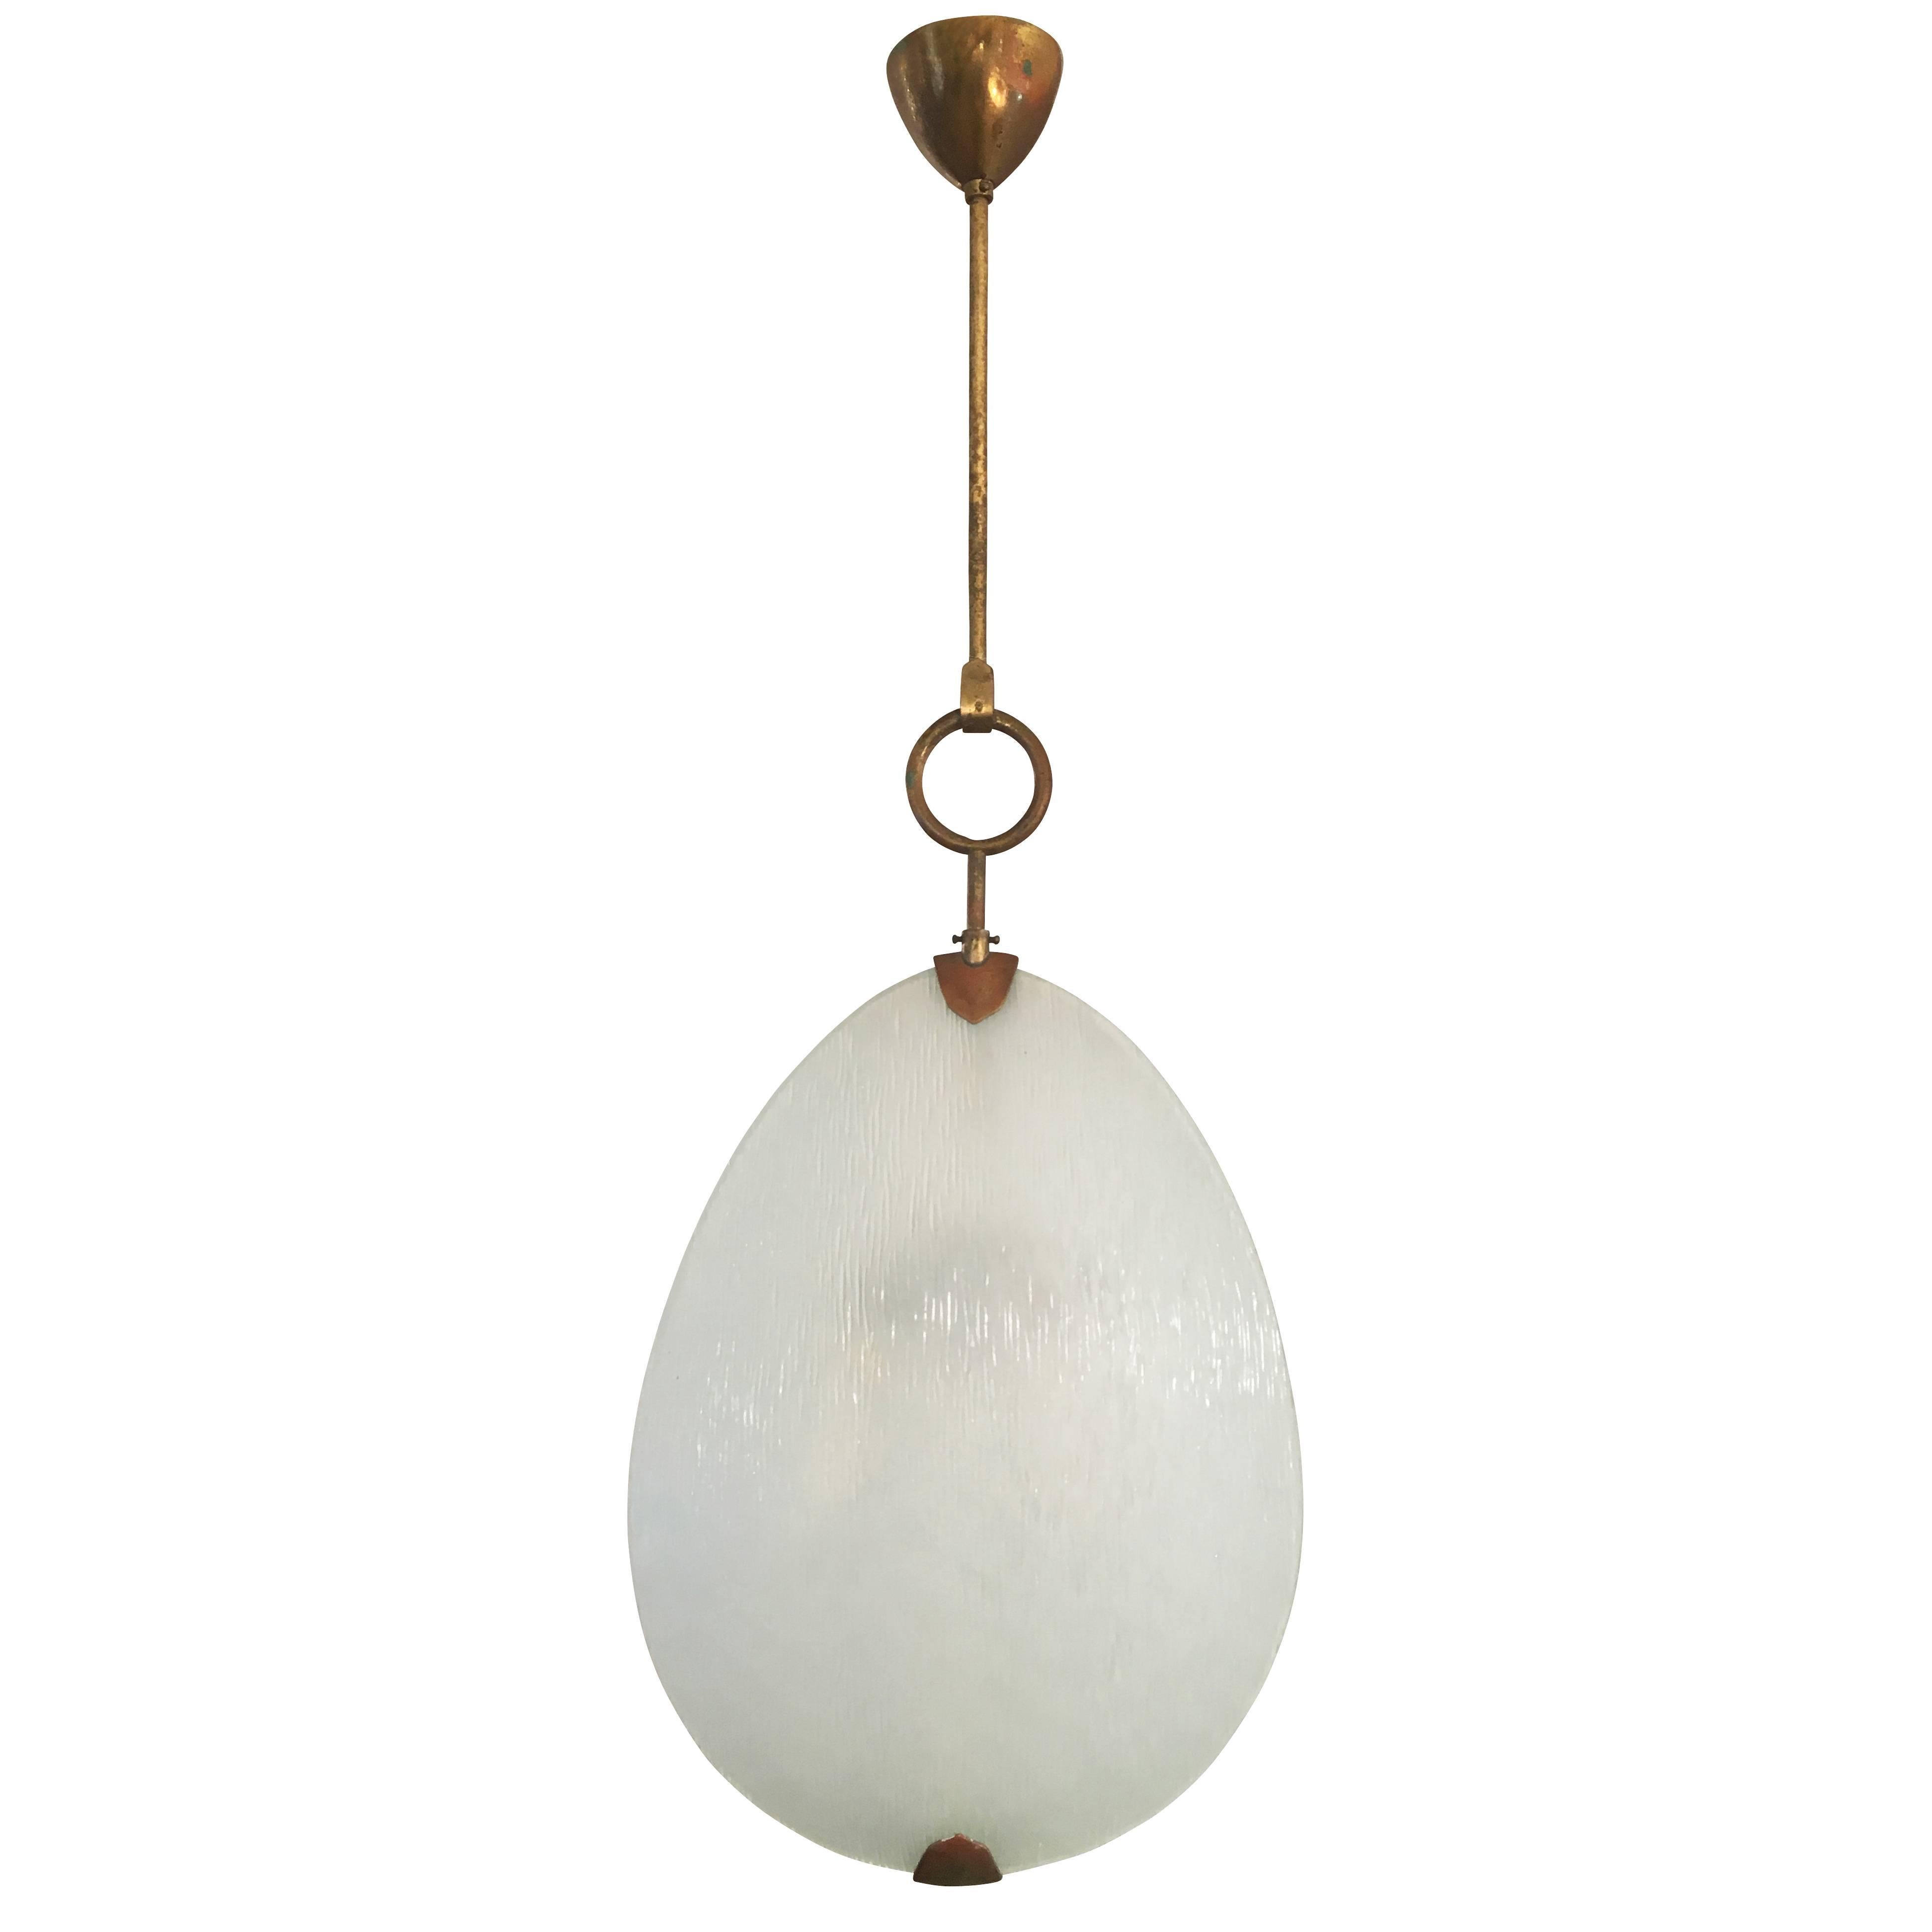 Exquisite Fontana Arte pendant designed by Max Ingrand in the 1960s featuring two textured glass shades. Holds two candelabra sockets. Hardware is brass.

Condition: The glass is in excellent condition. The brass frame is tarnished but can be